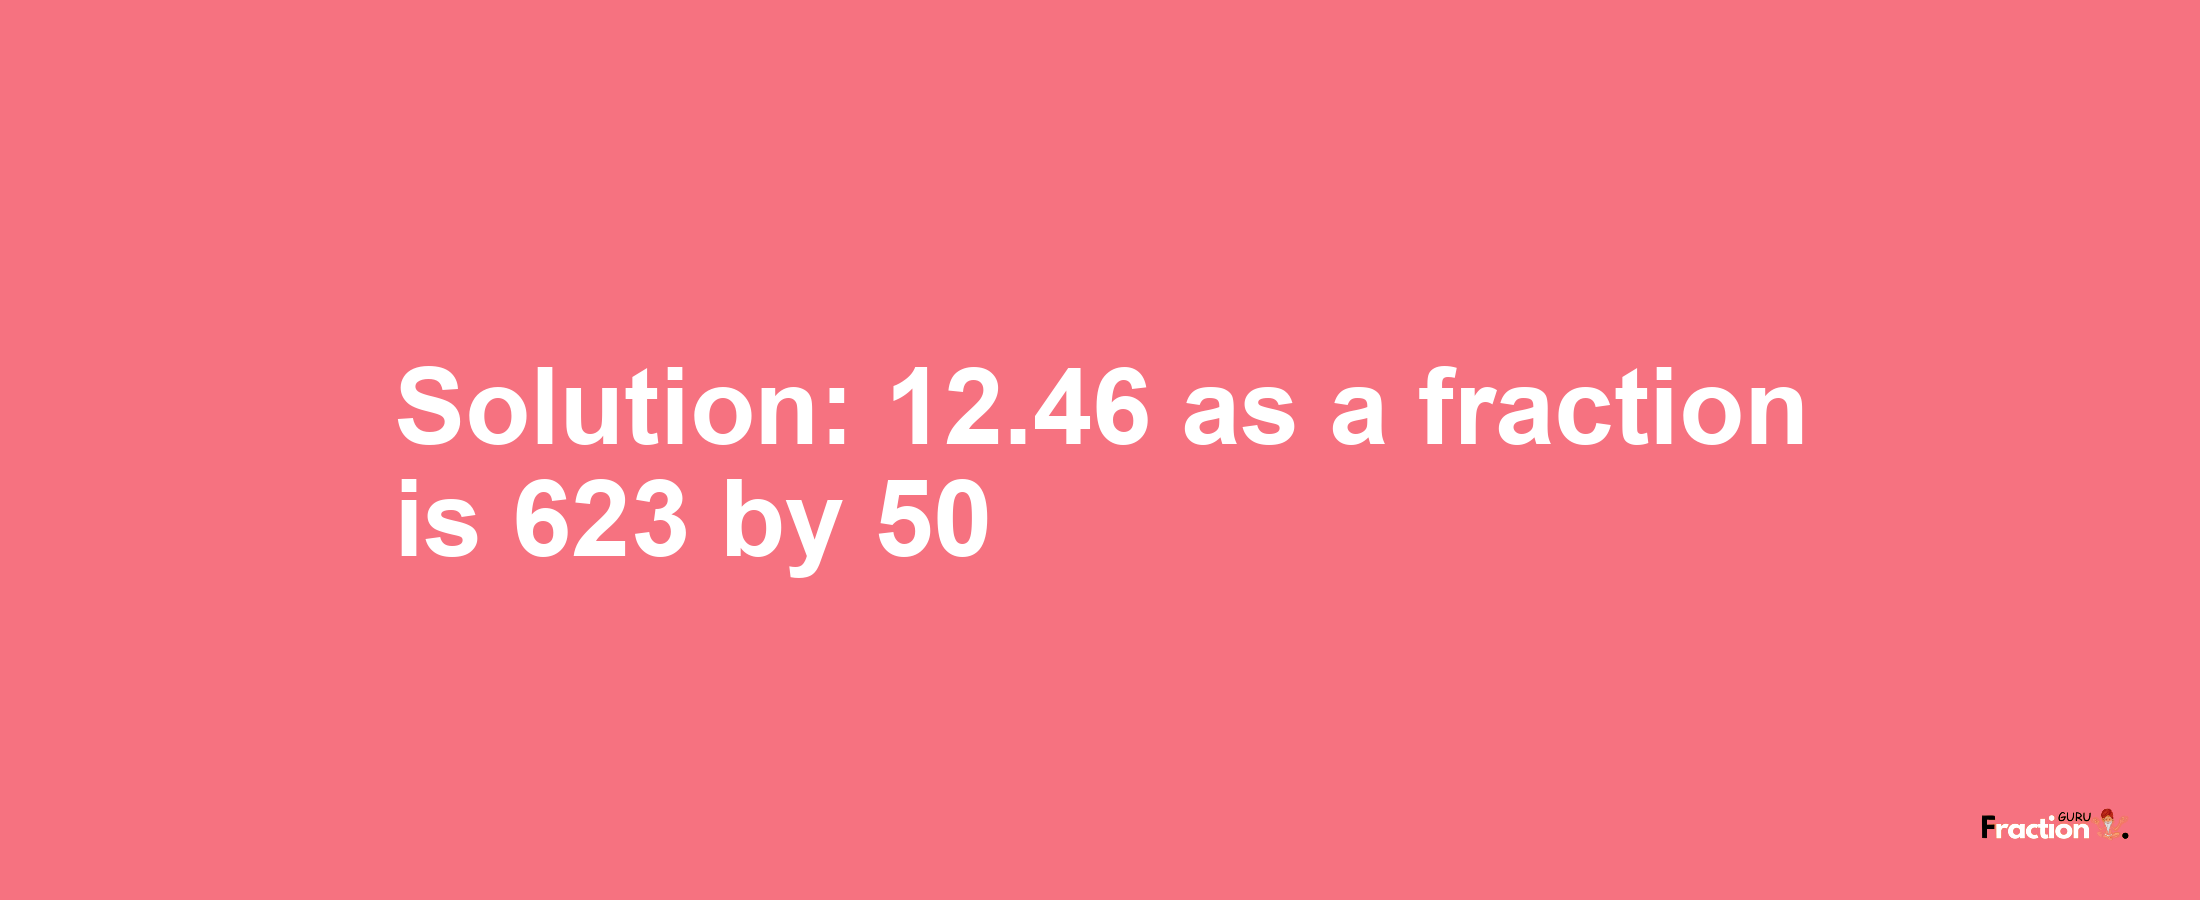 Solution:12.46 as a fraction is 623/50